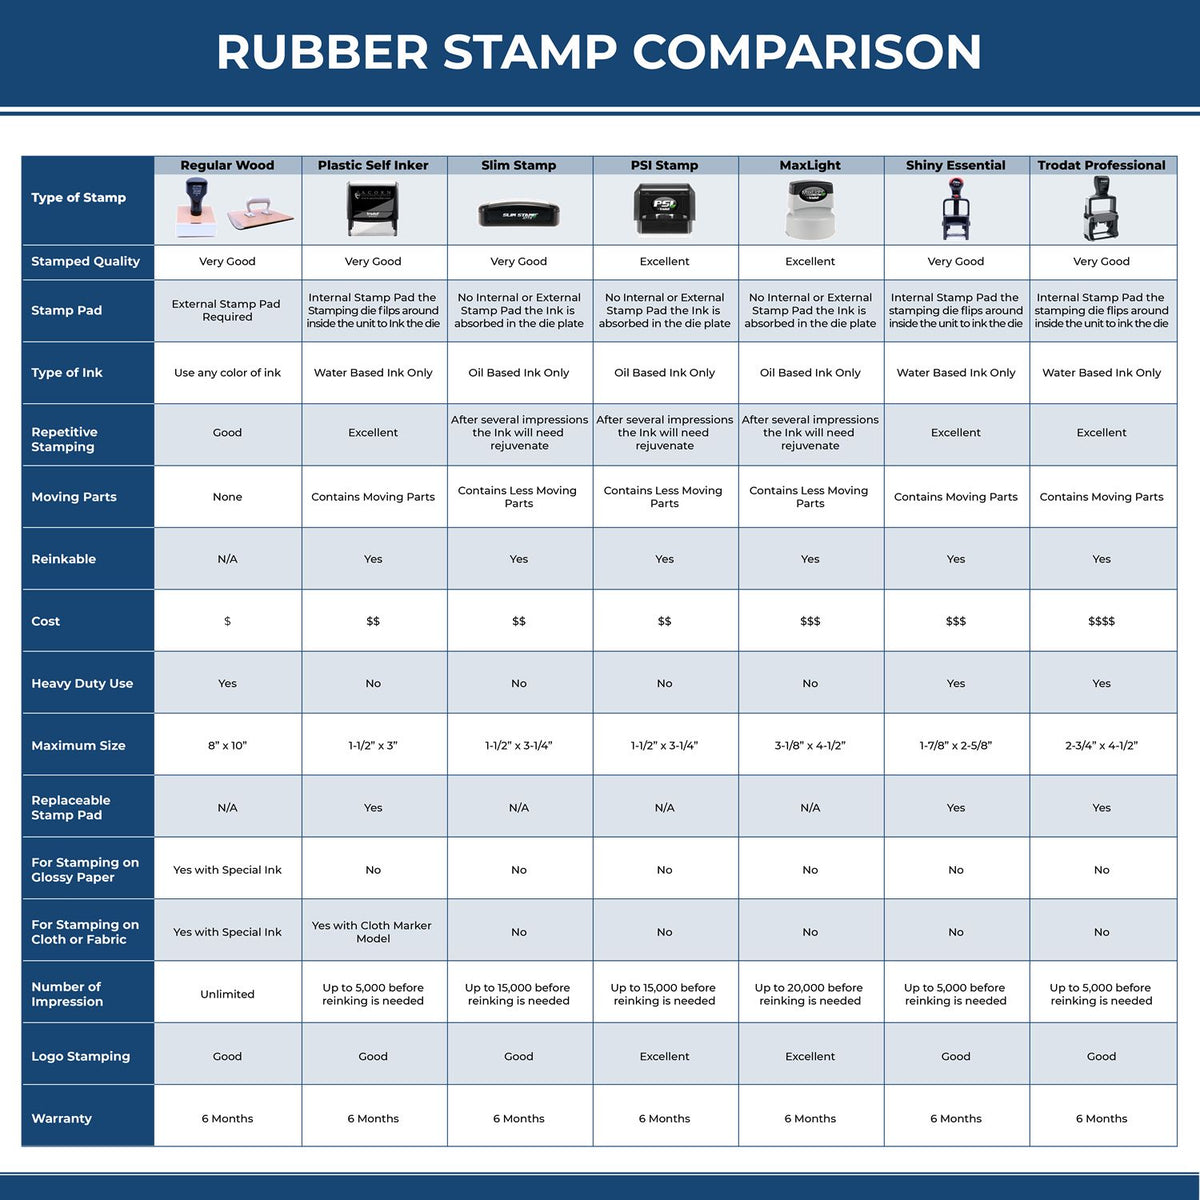 Large Self Inking Chrono Stamp 4109S Rubber Stamp Comparison